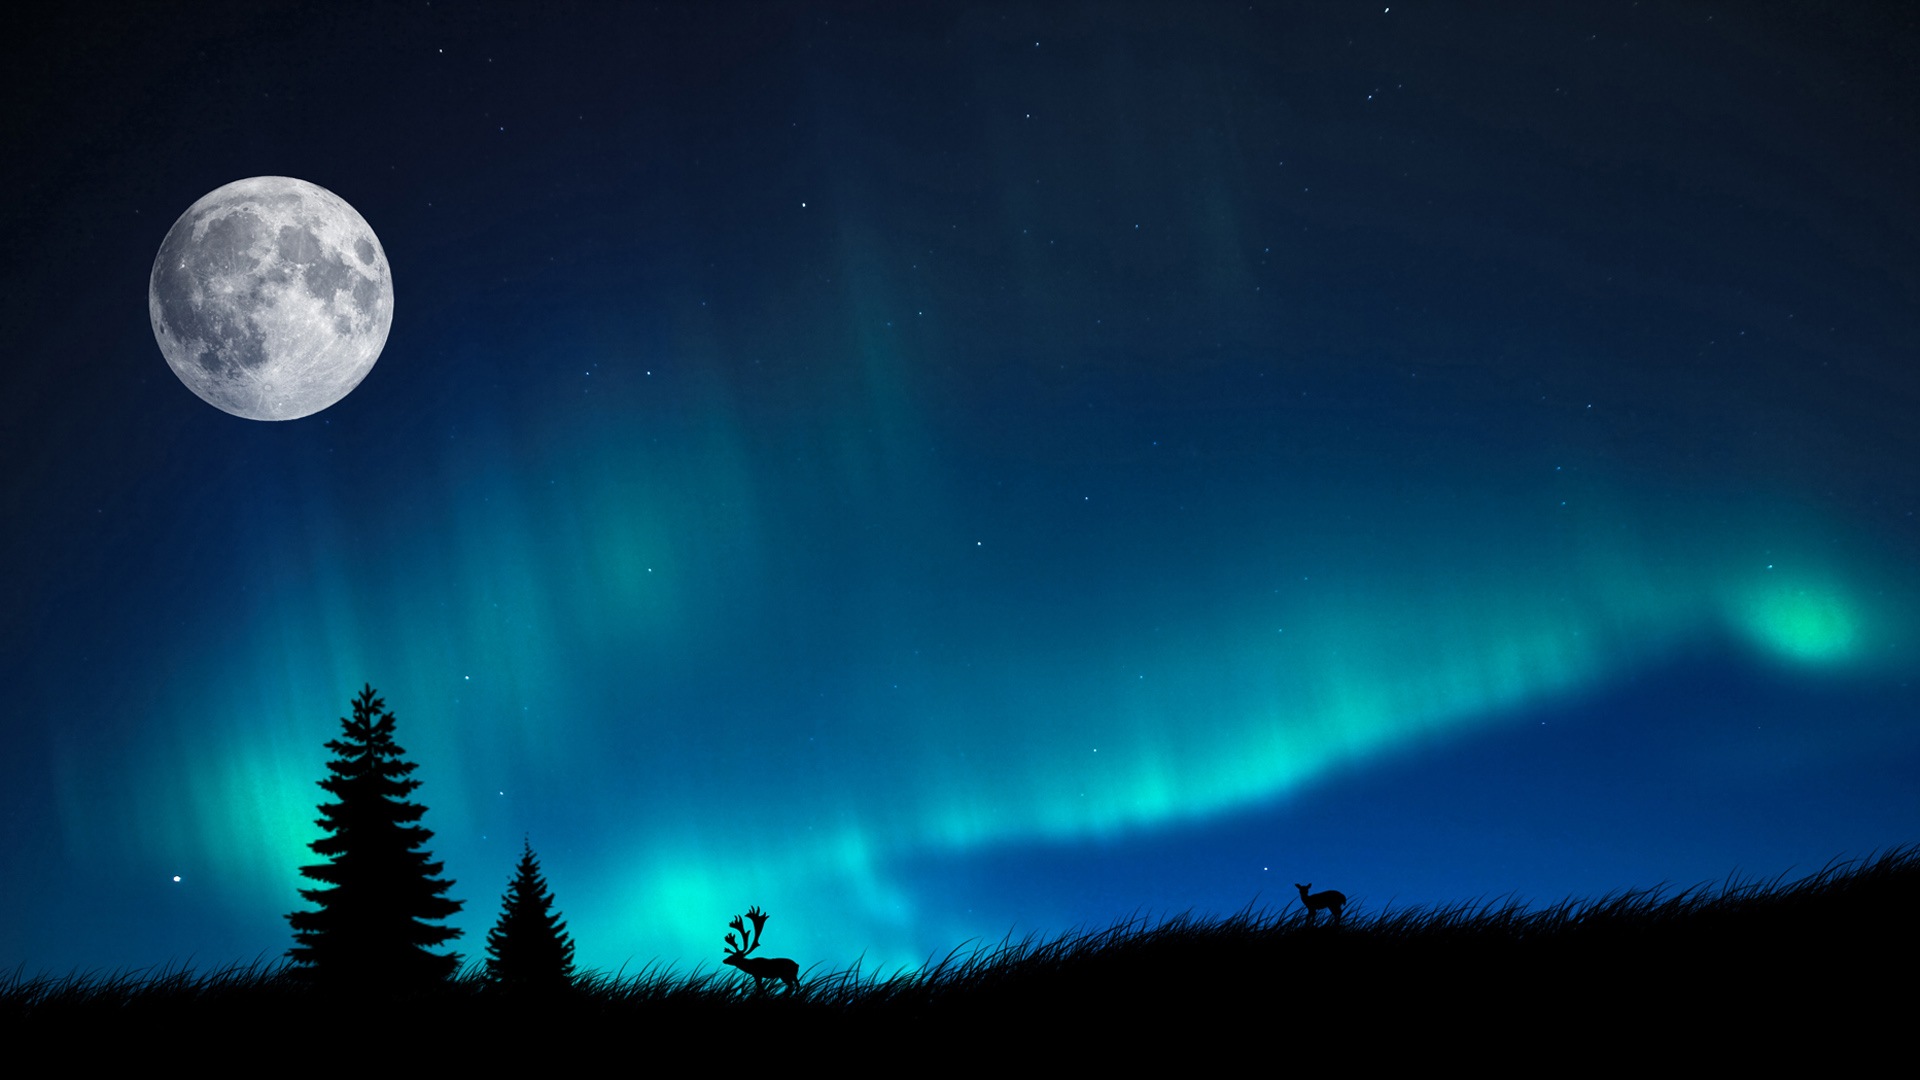 Natural wonders of the Northern Lights HD Wallpaper (1) #13 - 1920x1080